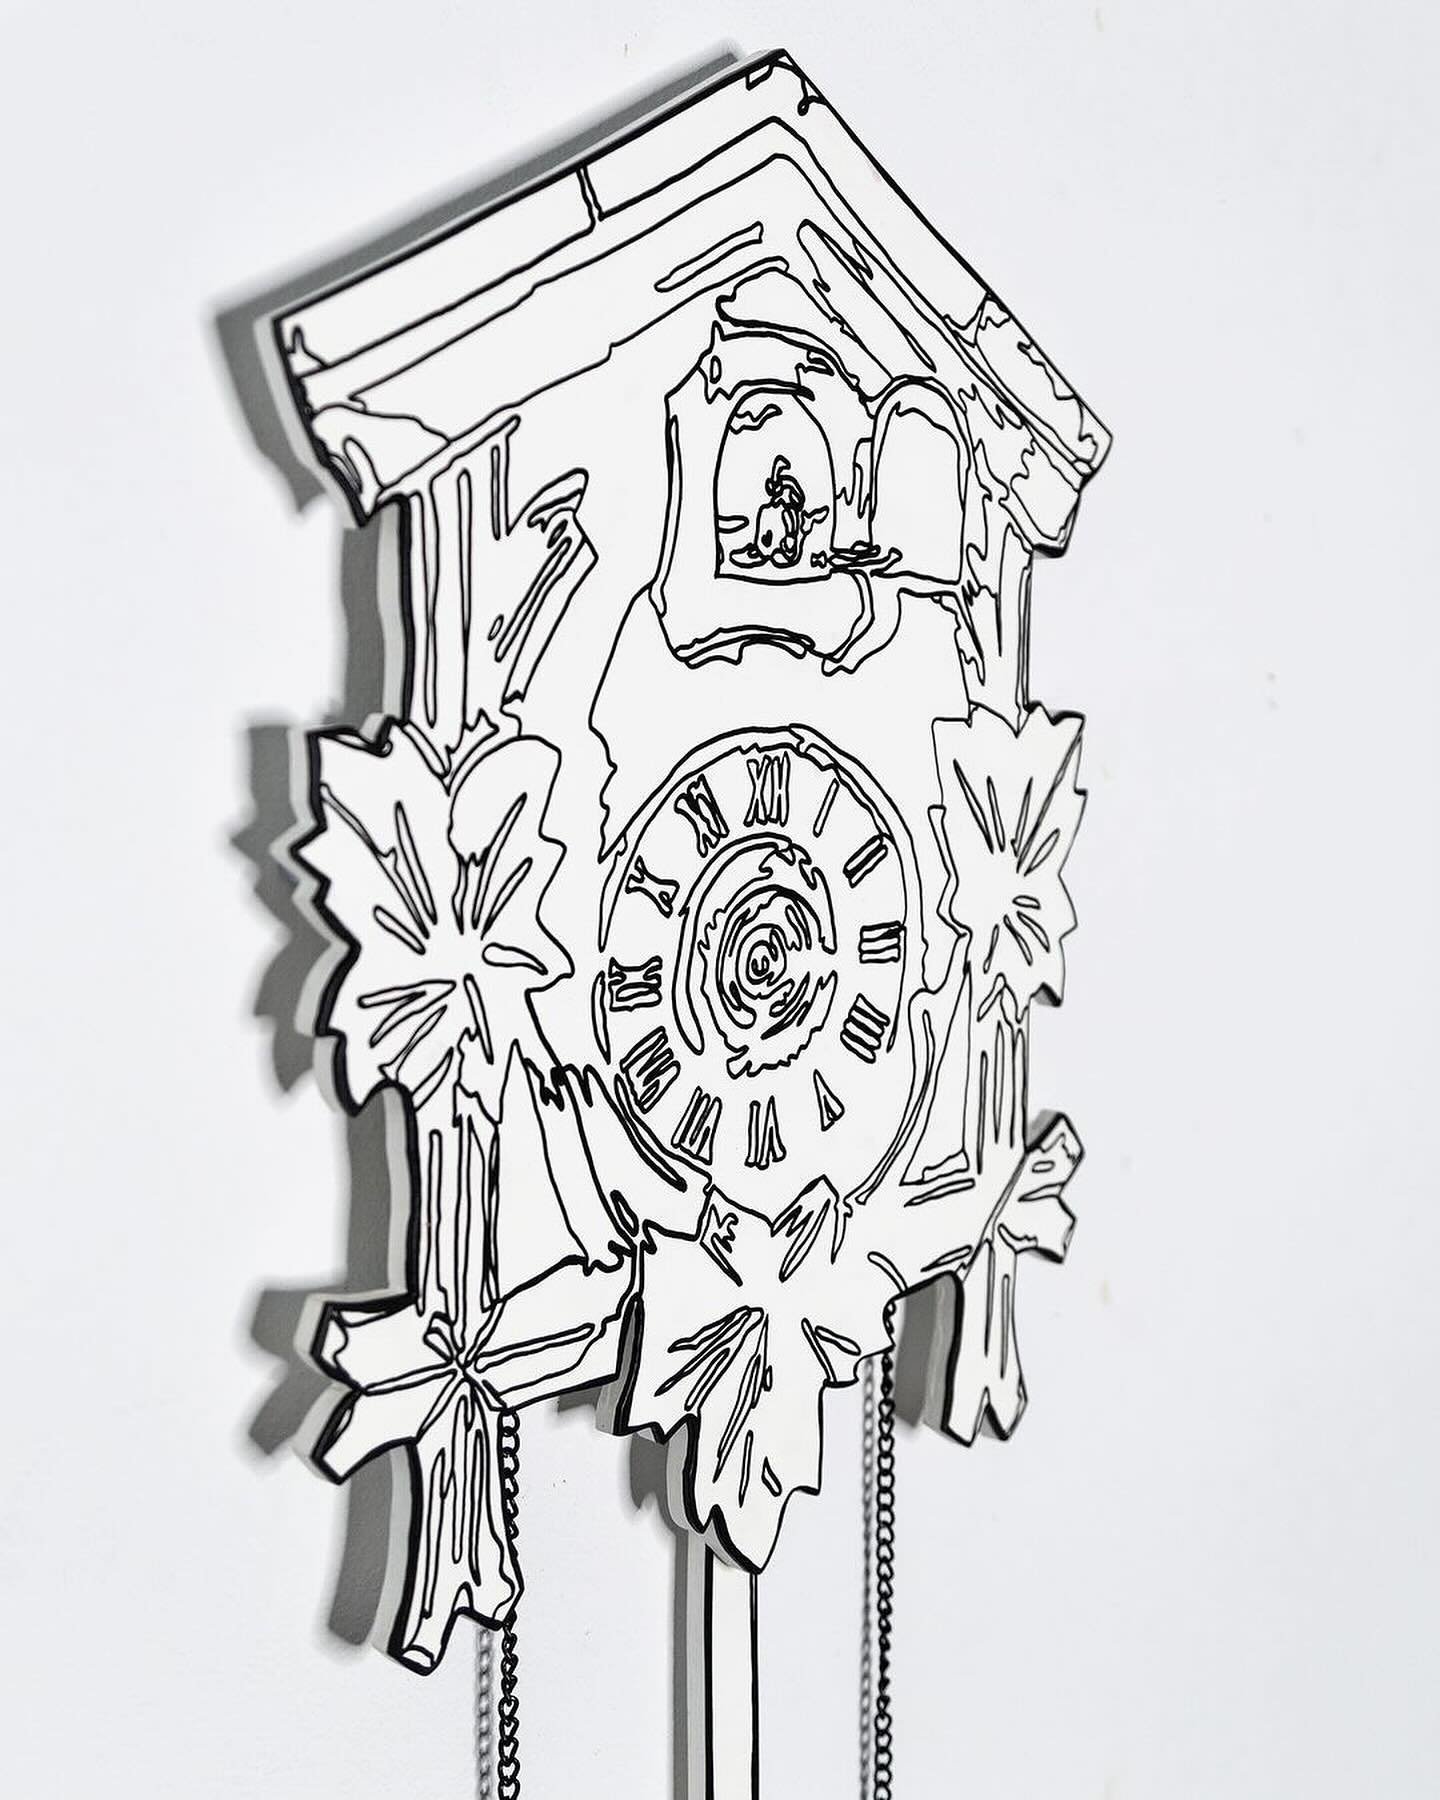 Reposting this as an experiment:

Untitled (Cuckoo Clock), 2022
Acrylic on board, metal chain
95 x 36 cm | 37 x 14 inches
Available to collectors
&bull;
Linked to a vivid childhood memory, this piece is an inextricable part of my Home body of work. I